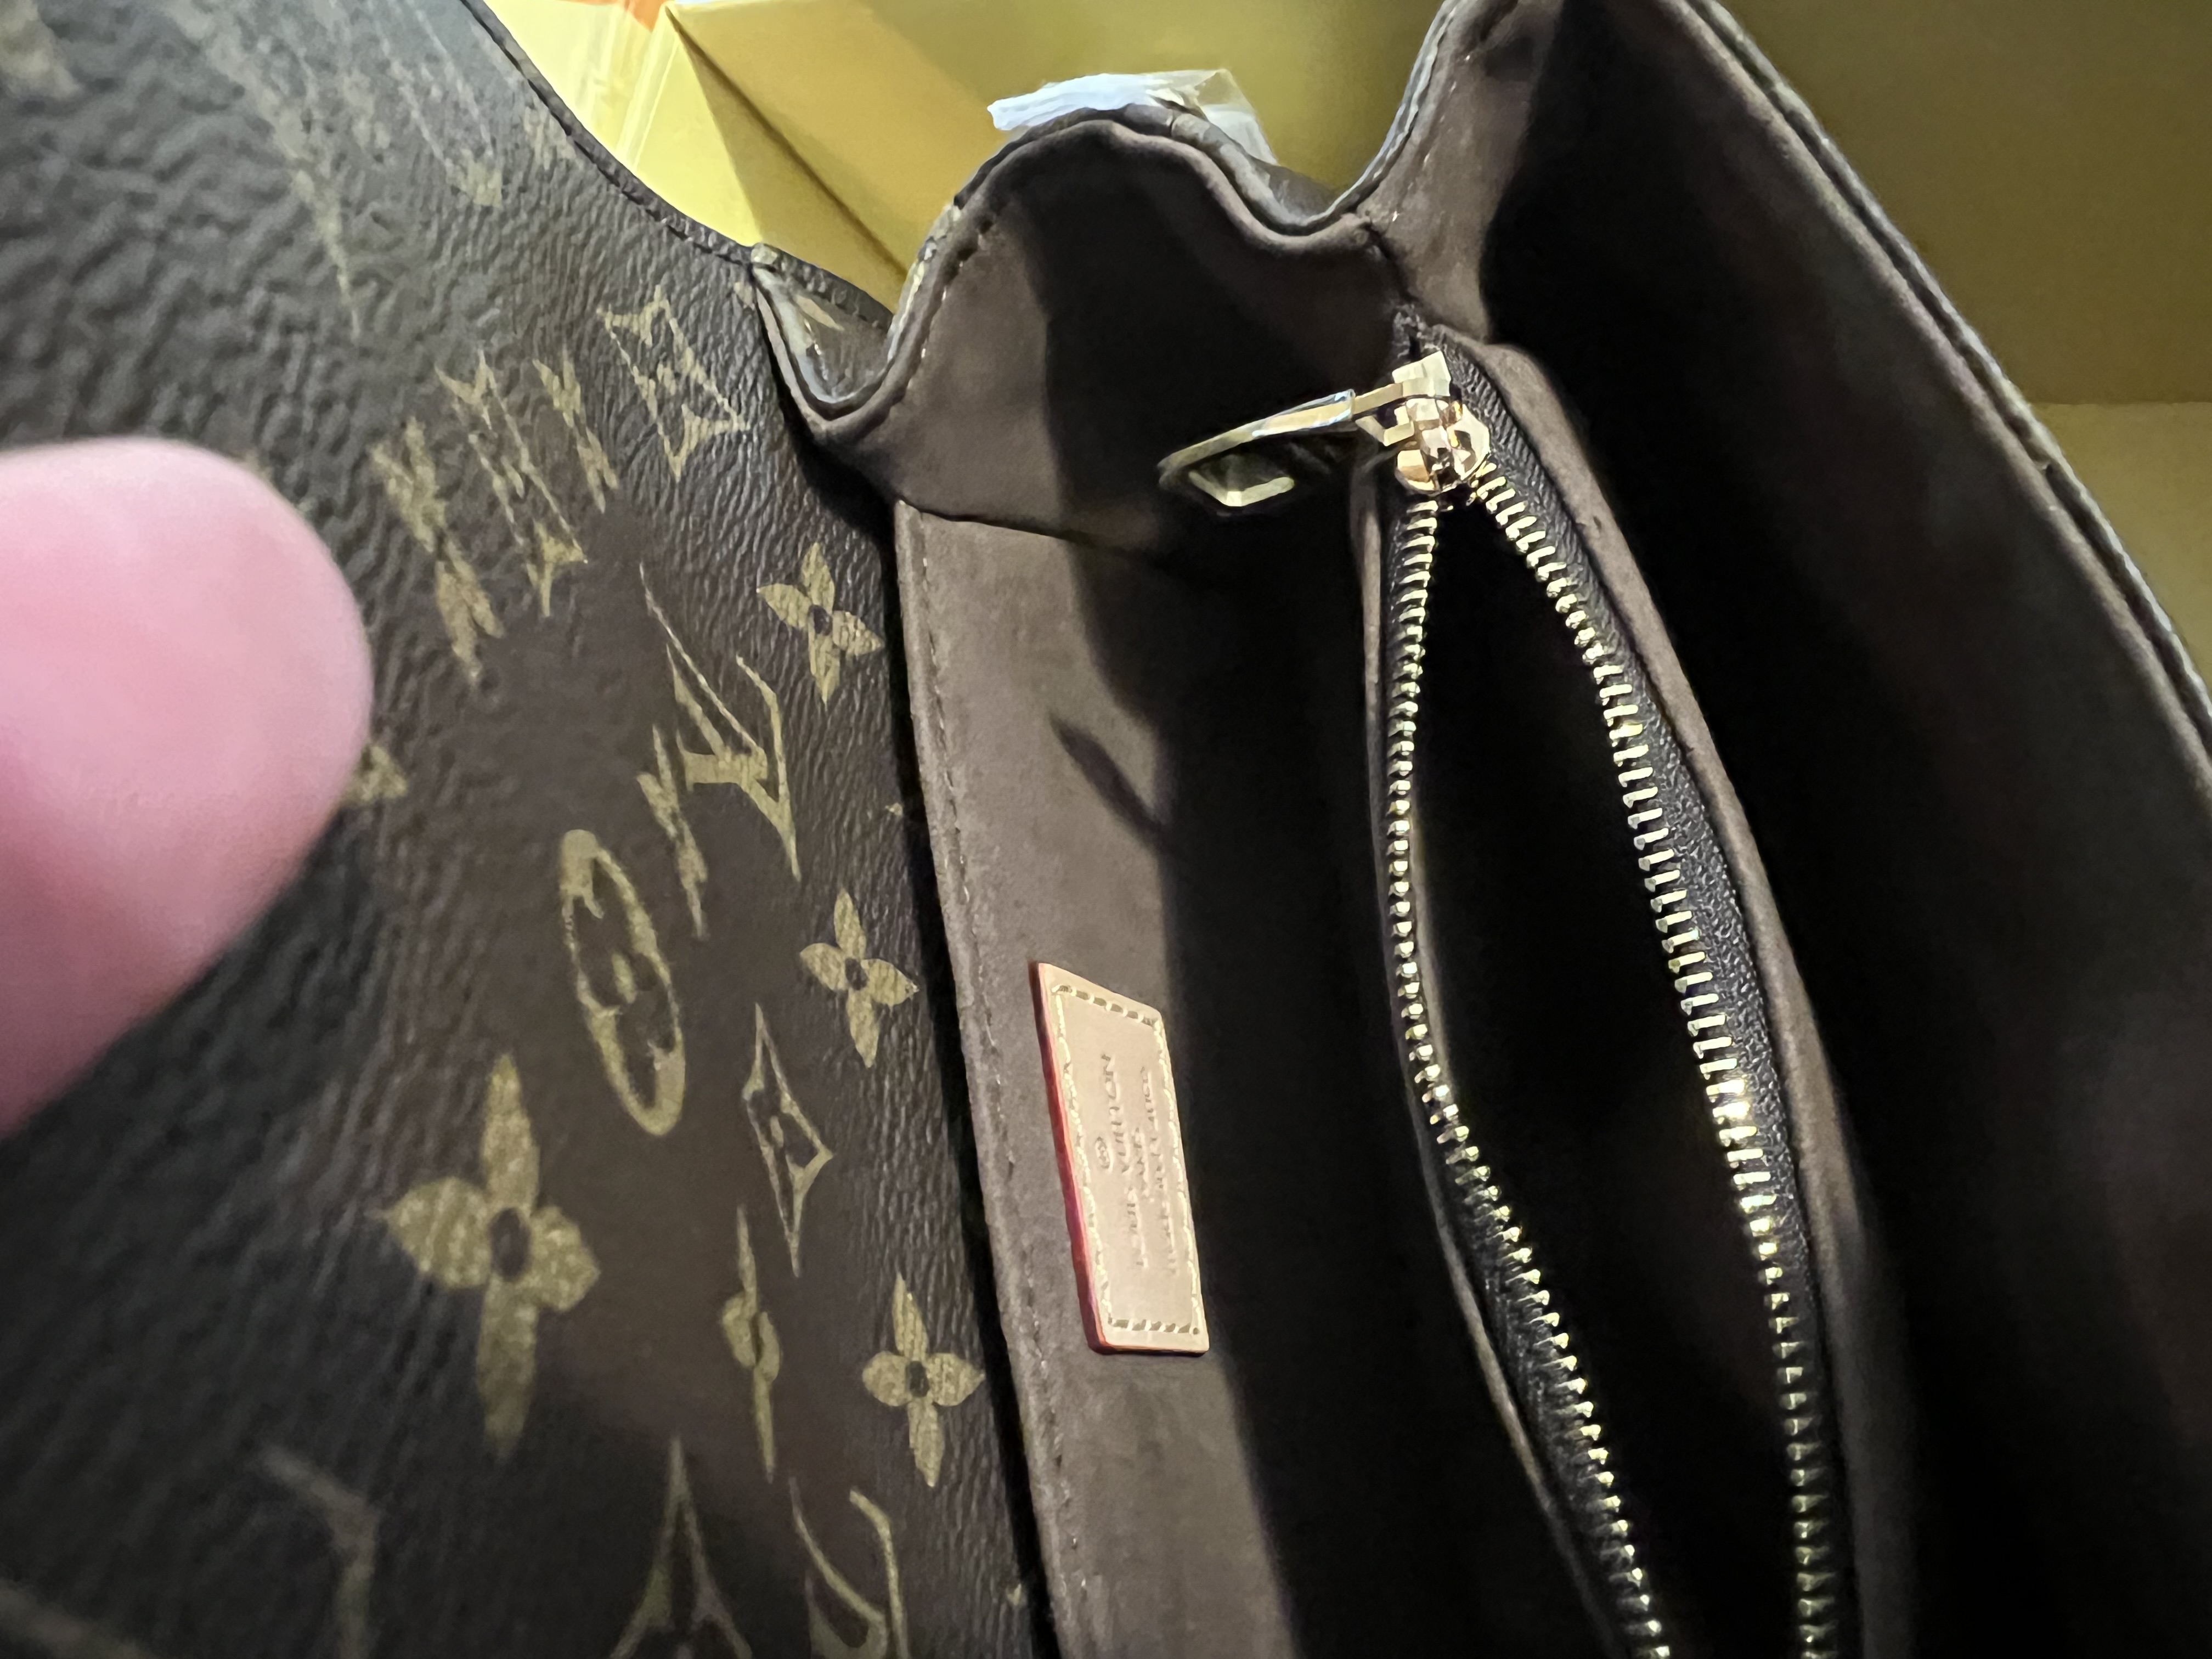 What it's like to shop the YSL outlet #ysl #luxurydeals